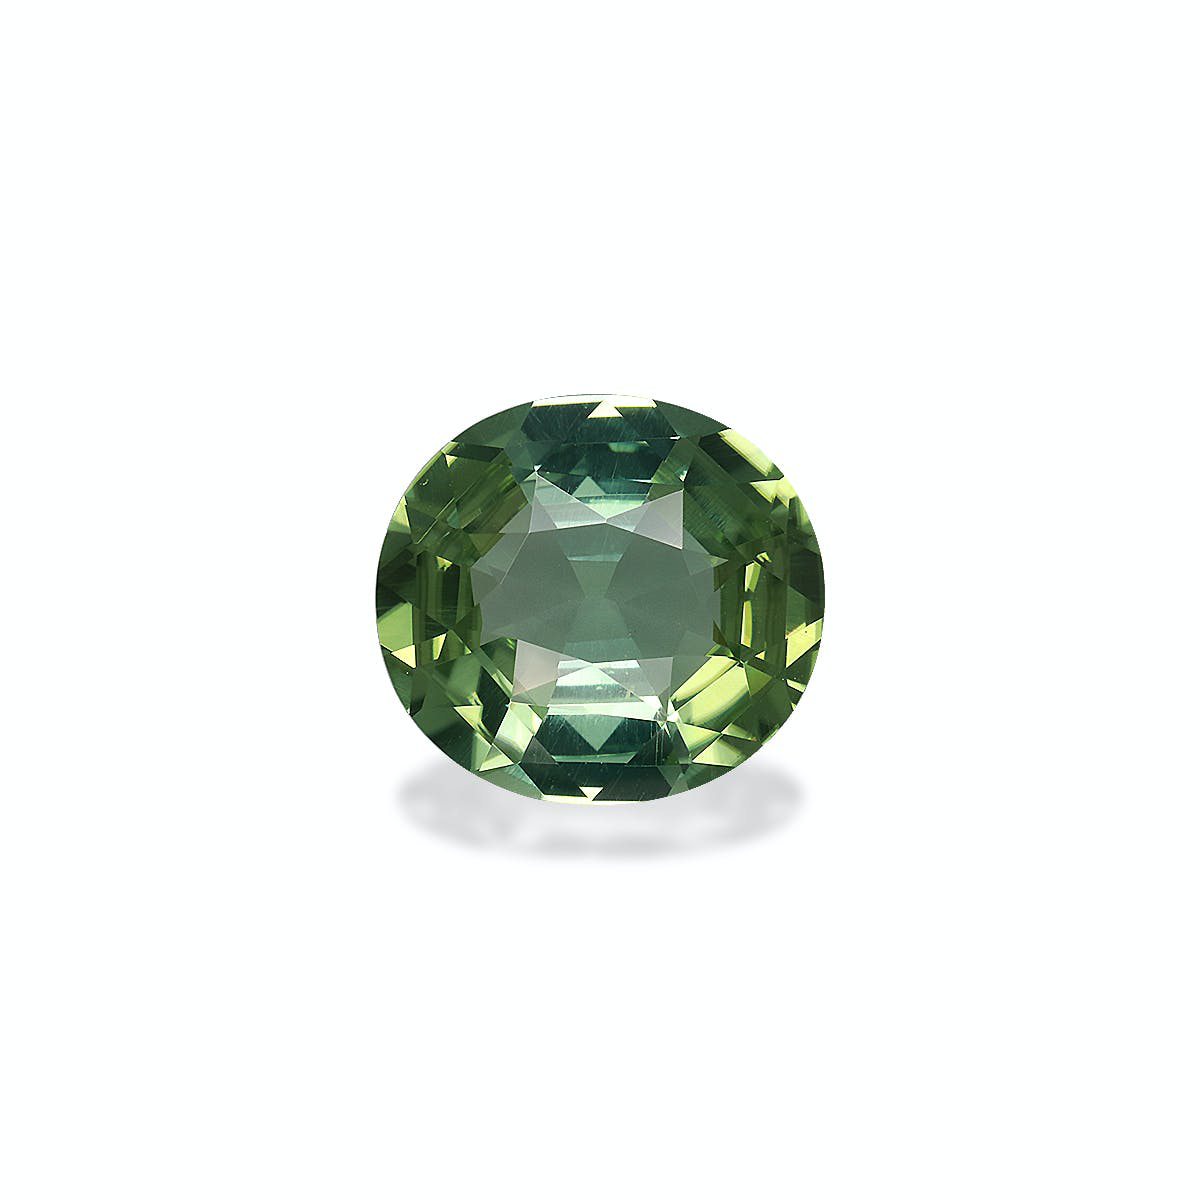 Picture of Cotton Green Tourmaline 6.17ct (TG0701)